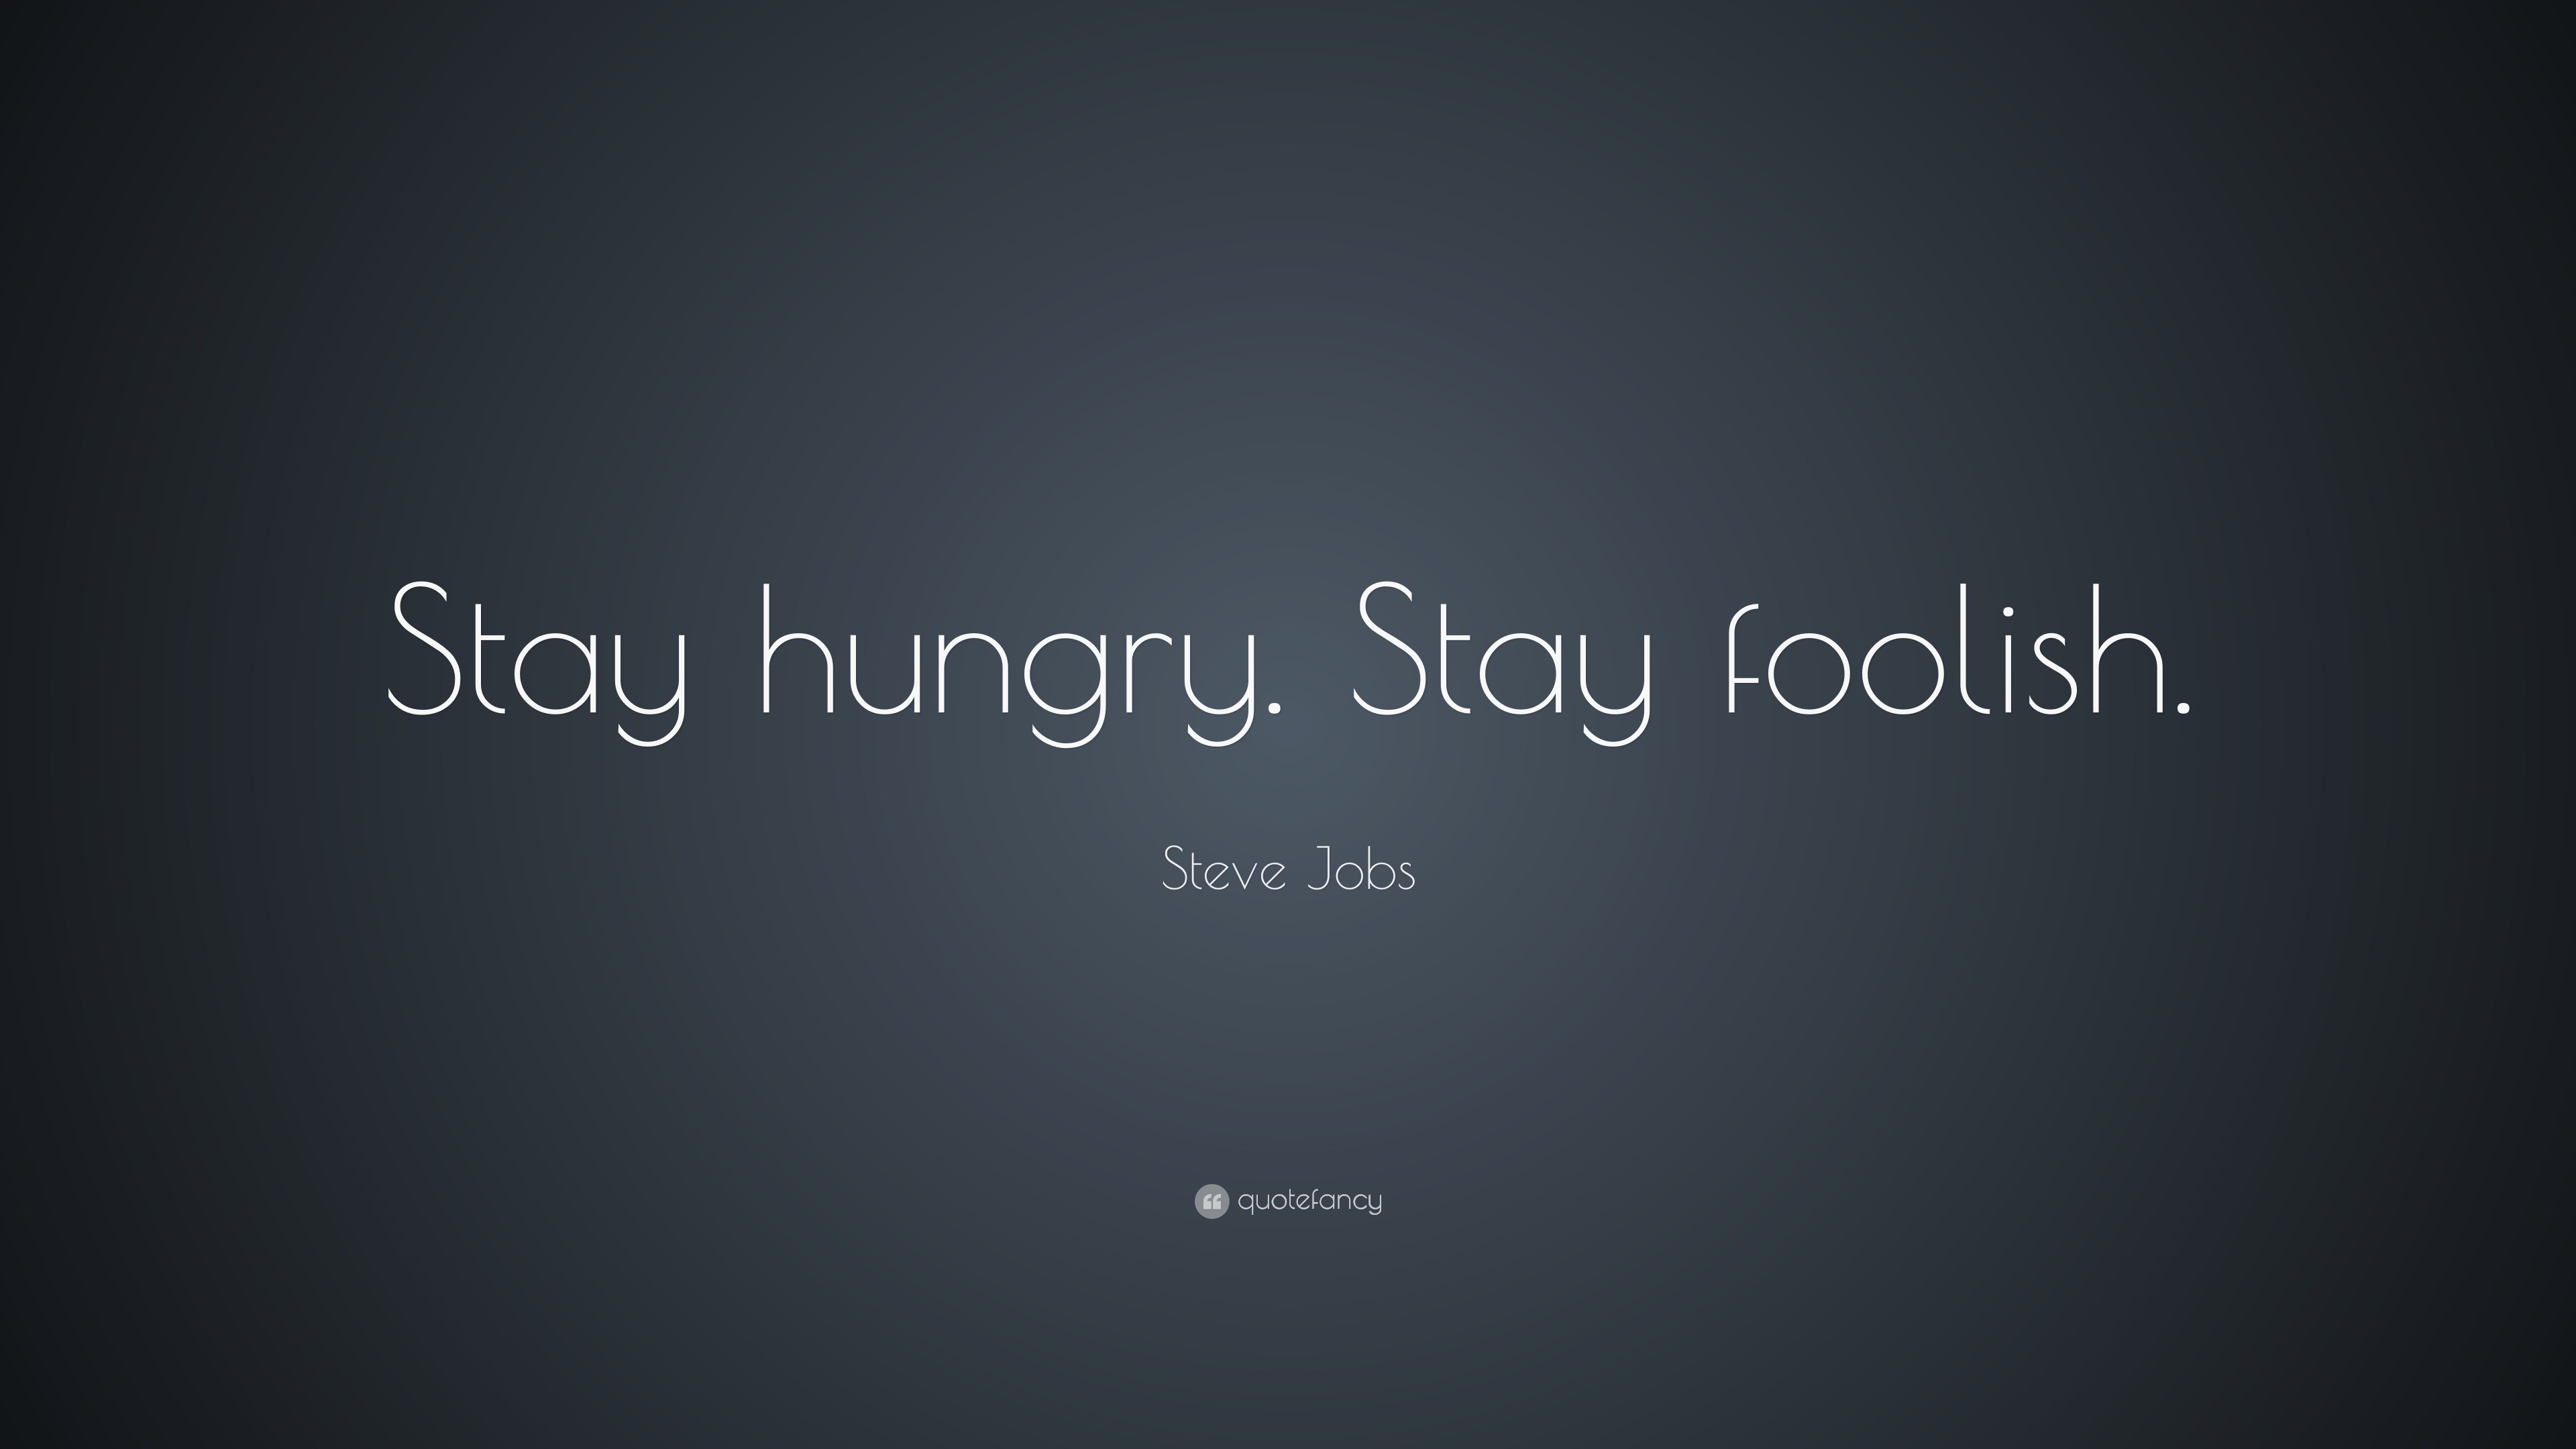 Steve Jobs Quote: “Stay hungry. Stay foolish.”